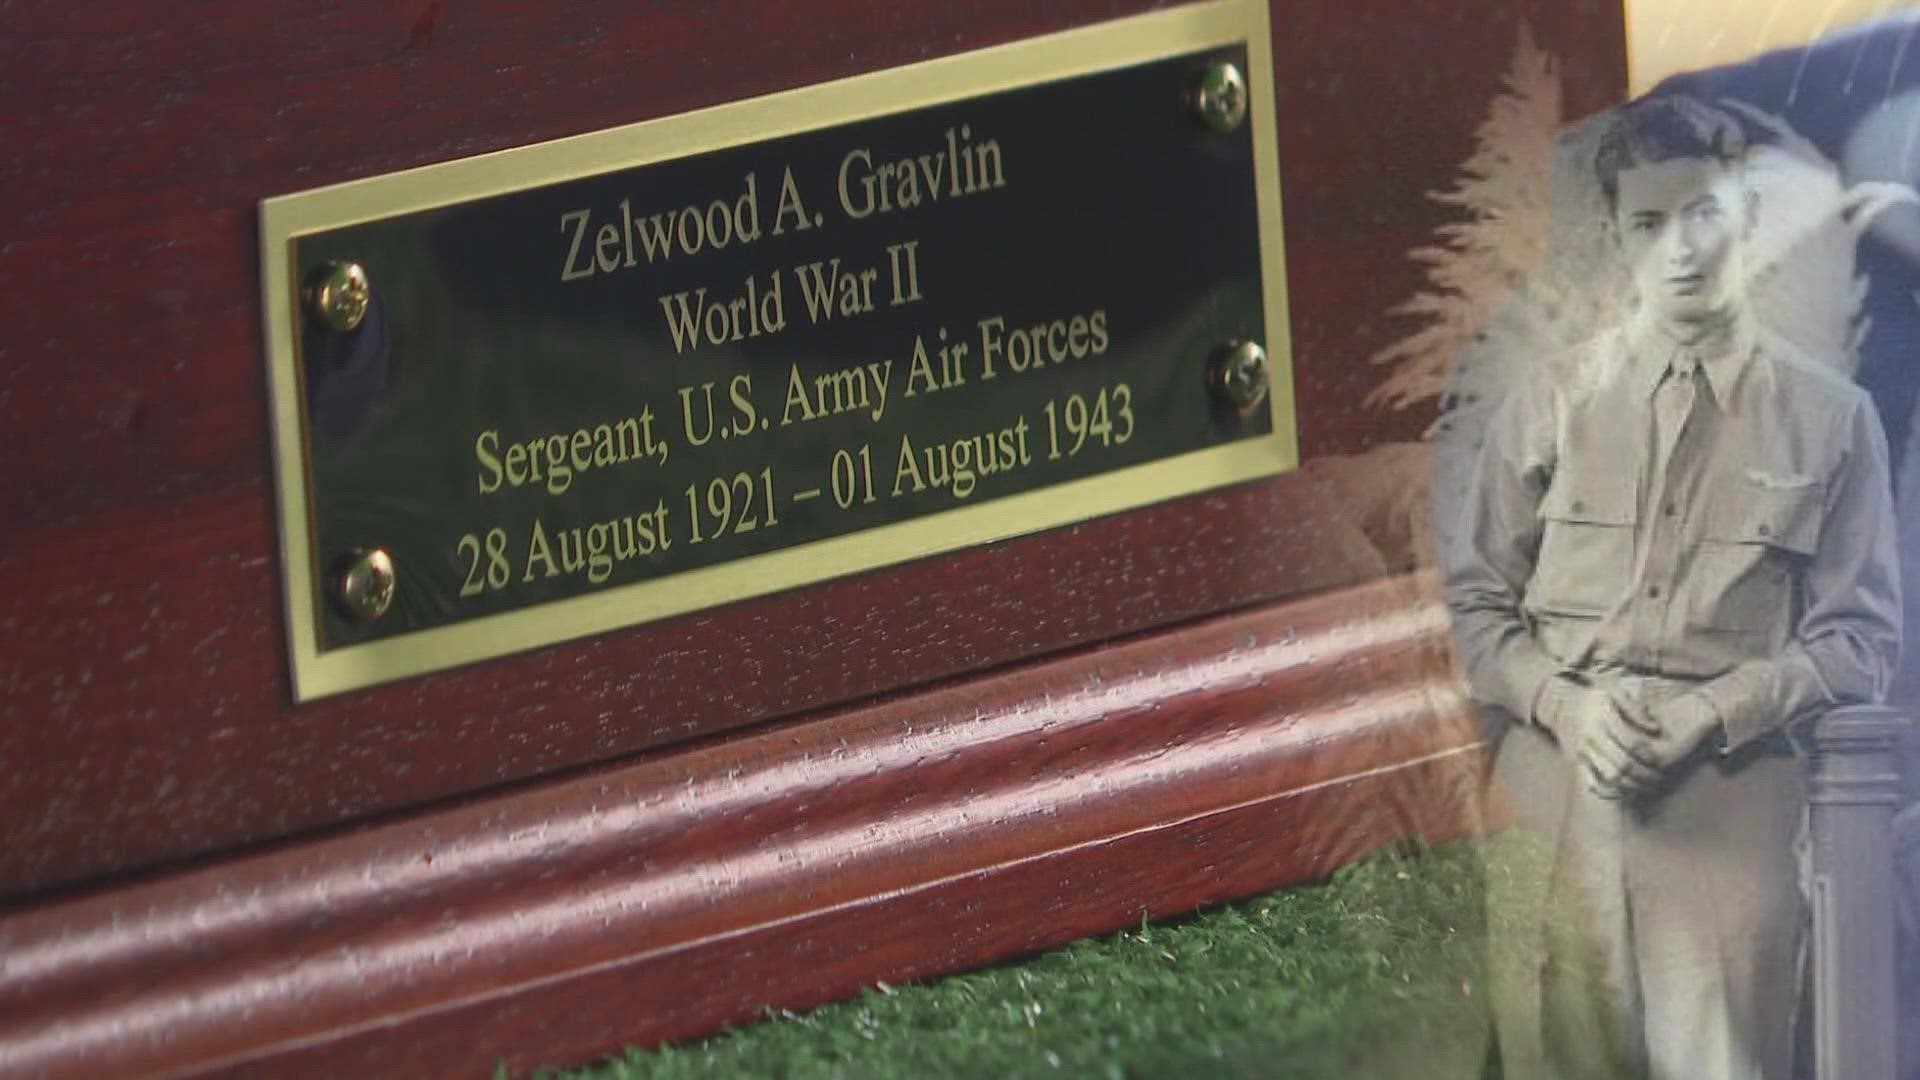 Zelwood Galvin’s remains are now laid to rest beside his mother and sister at home in Maine.